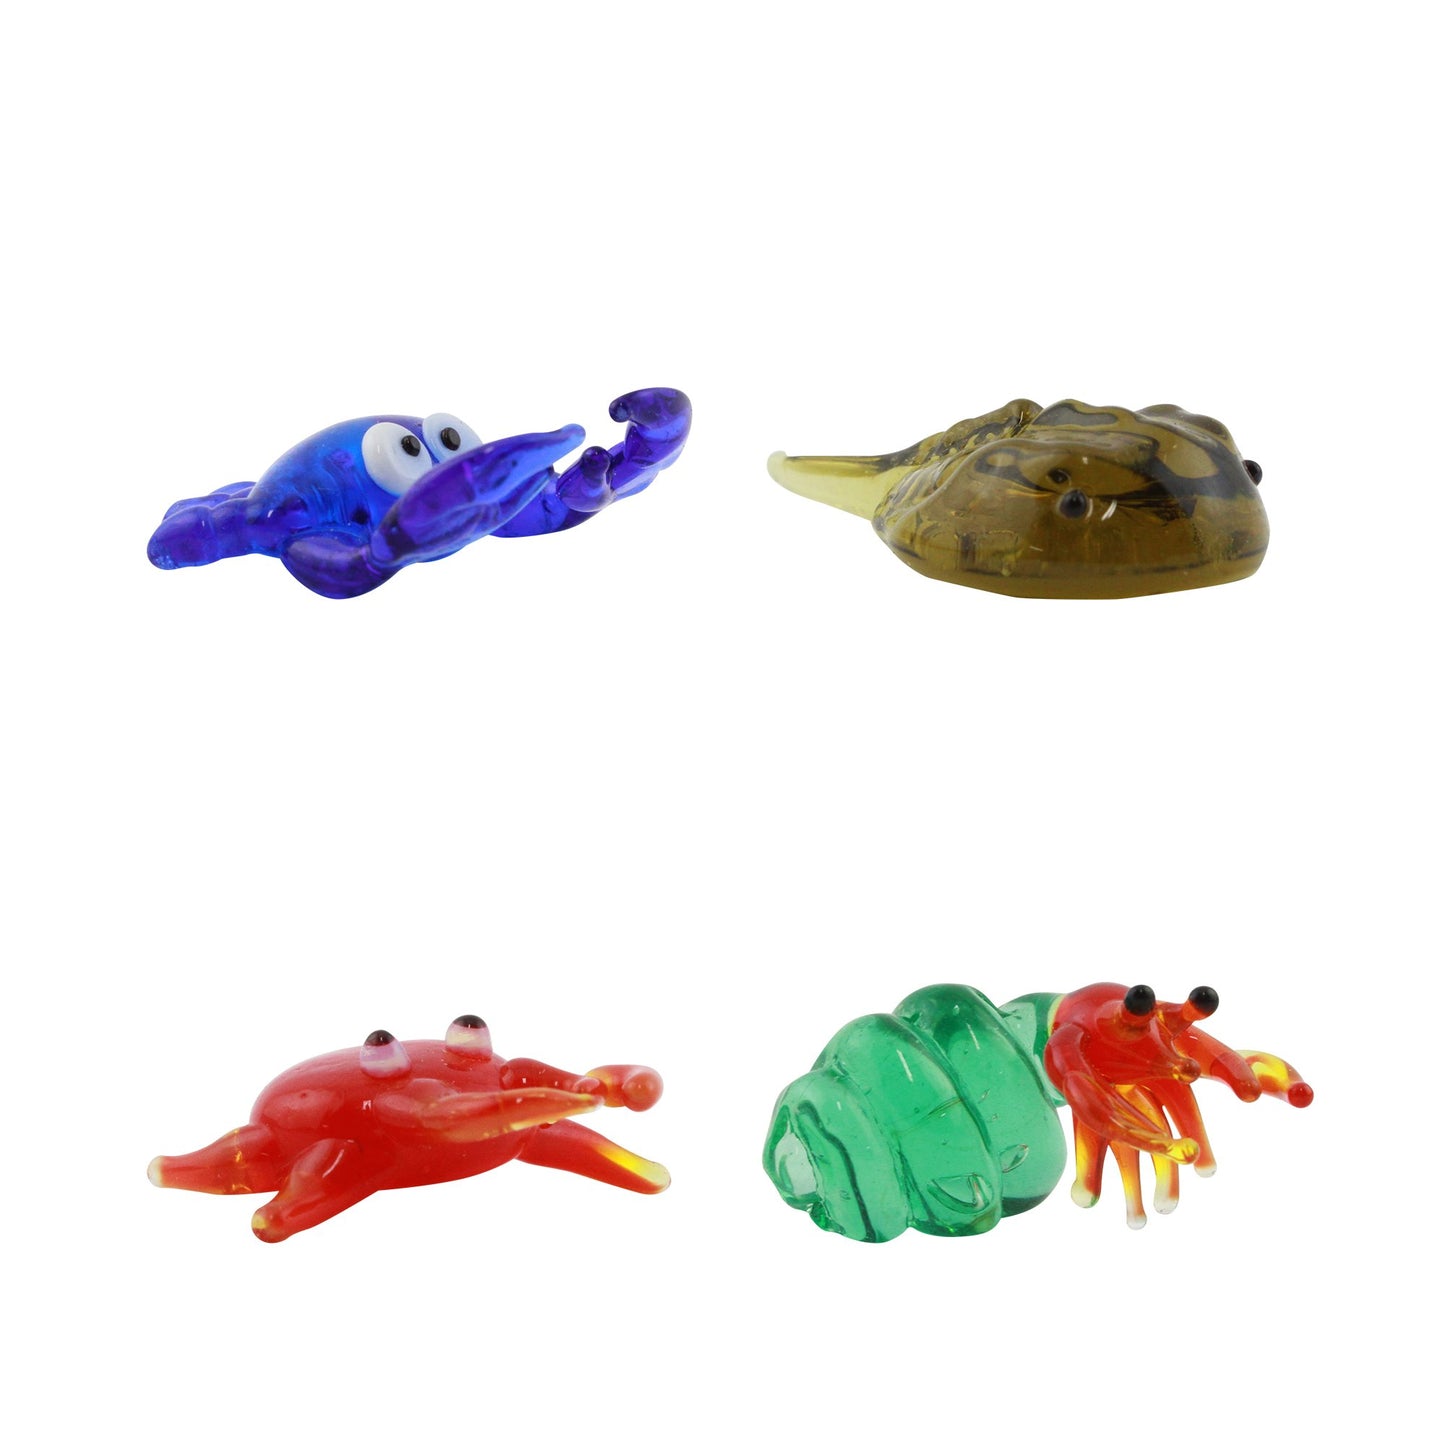 LookingGlass Crabs Set Minature Glass Collectibles Product Image